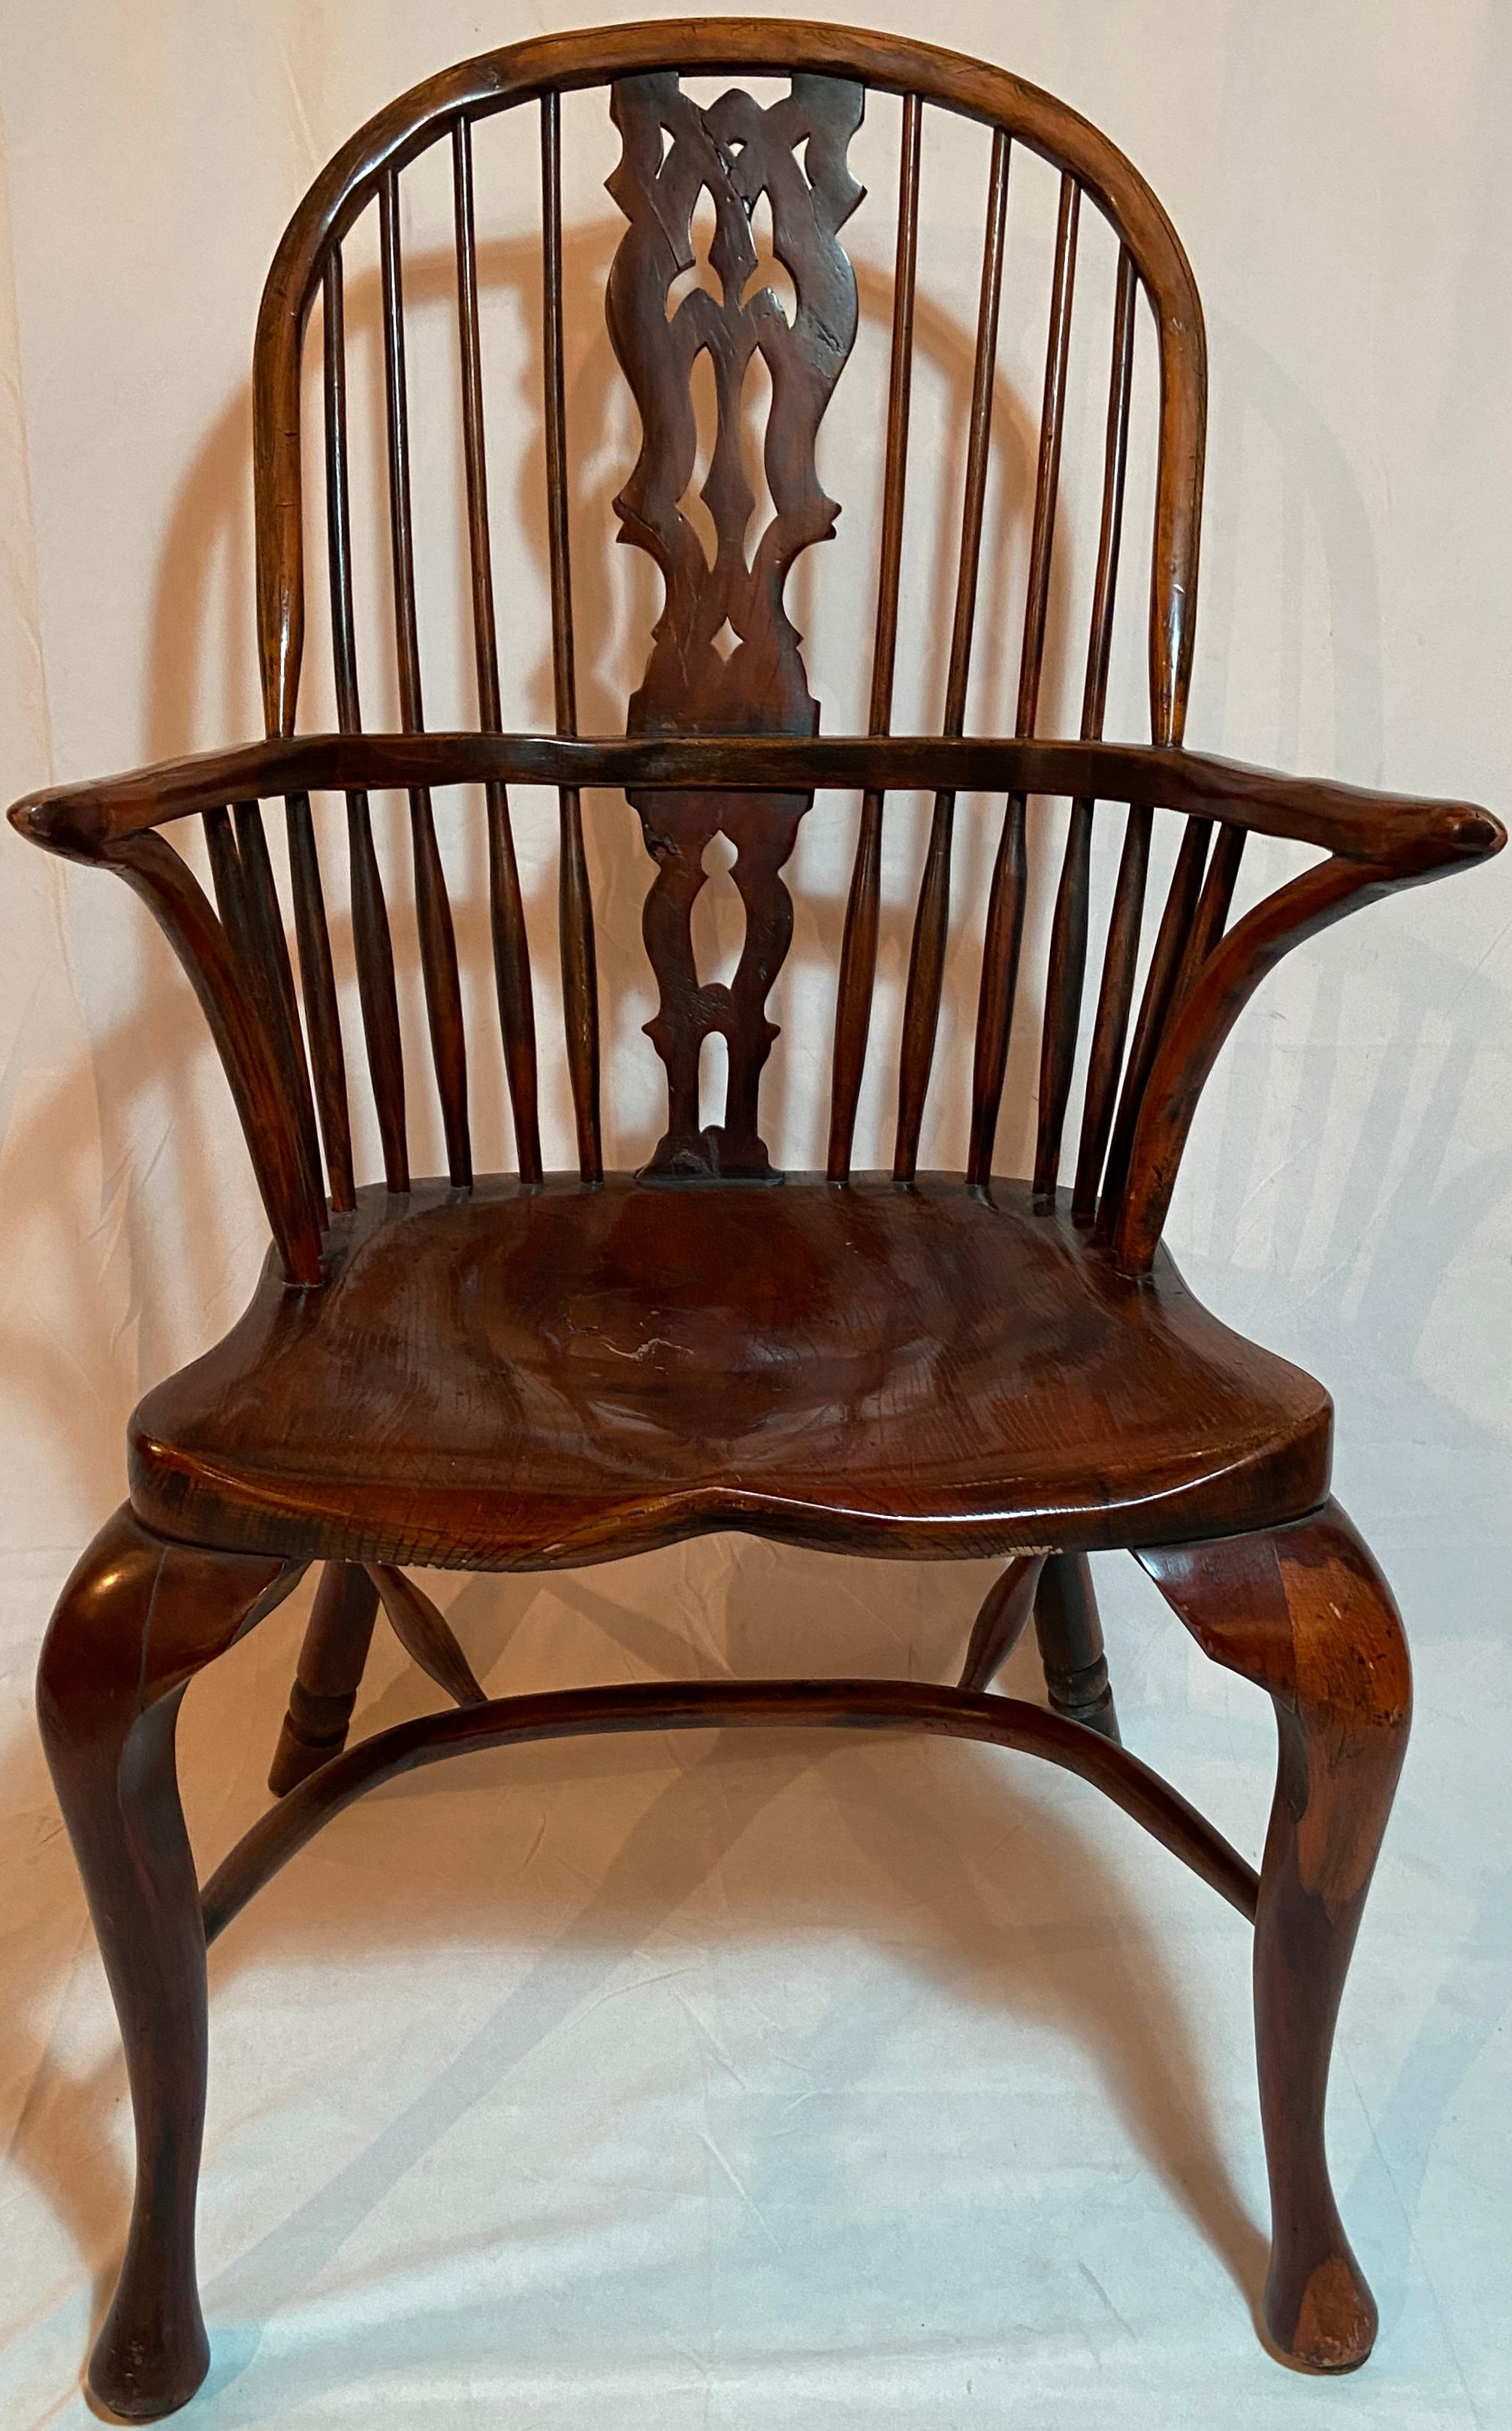 Set of 8 Antique English Windsor dining chairs, circa 1920's-1940's.